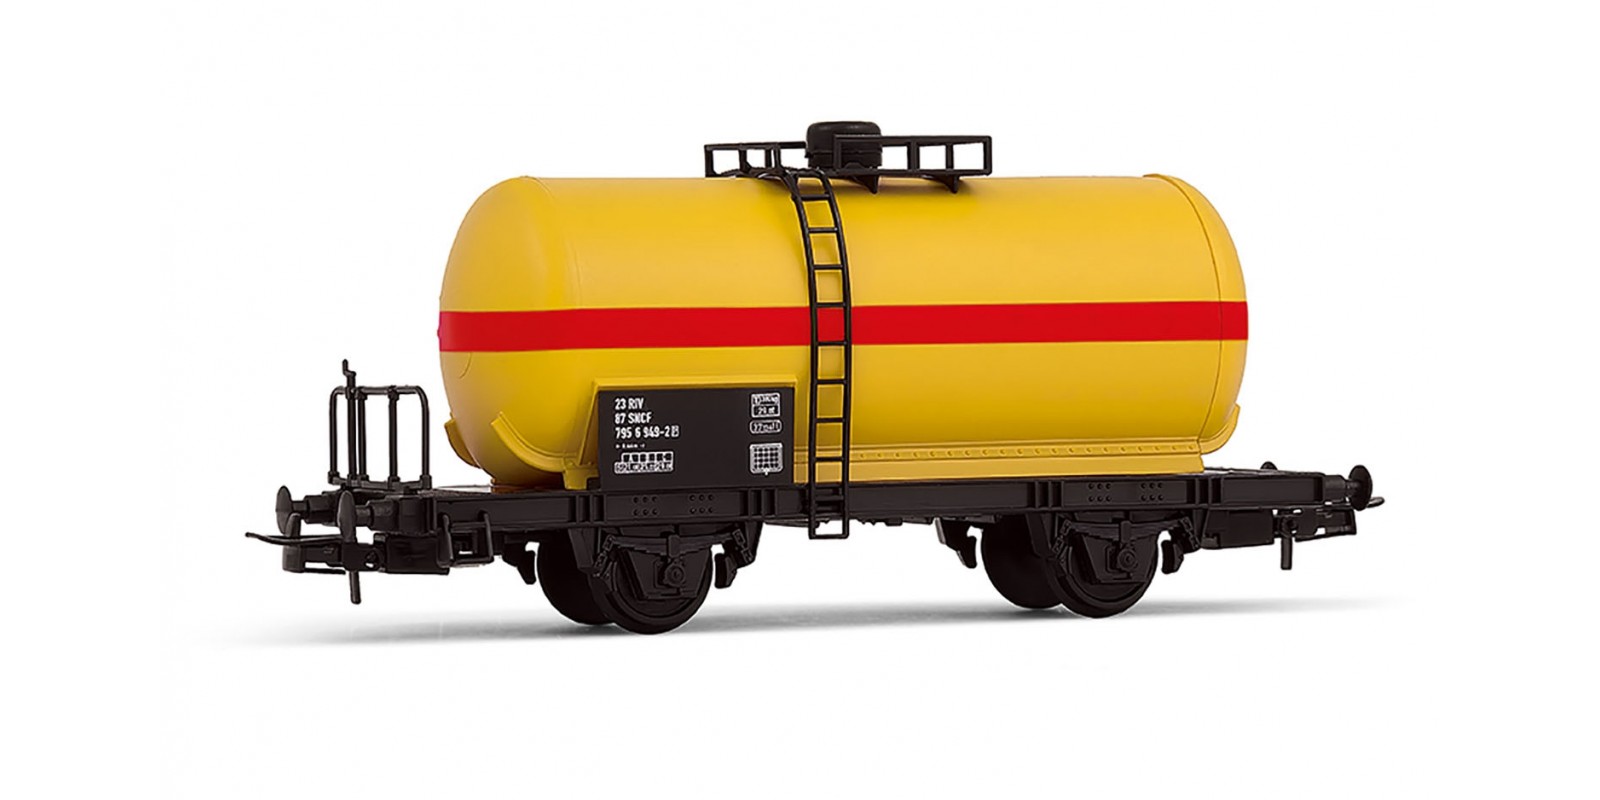 JO6140 Tank wagon 2 axles, yellow and red livery